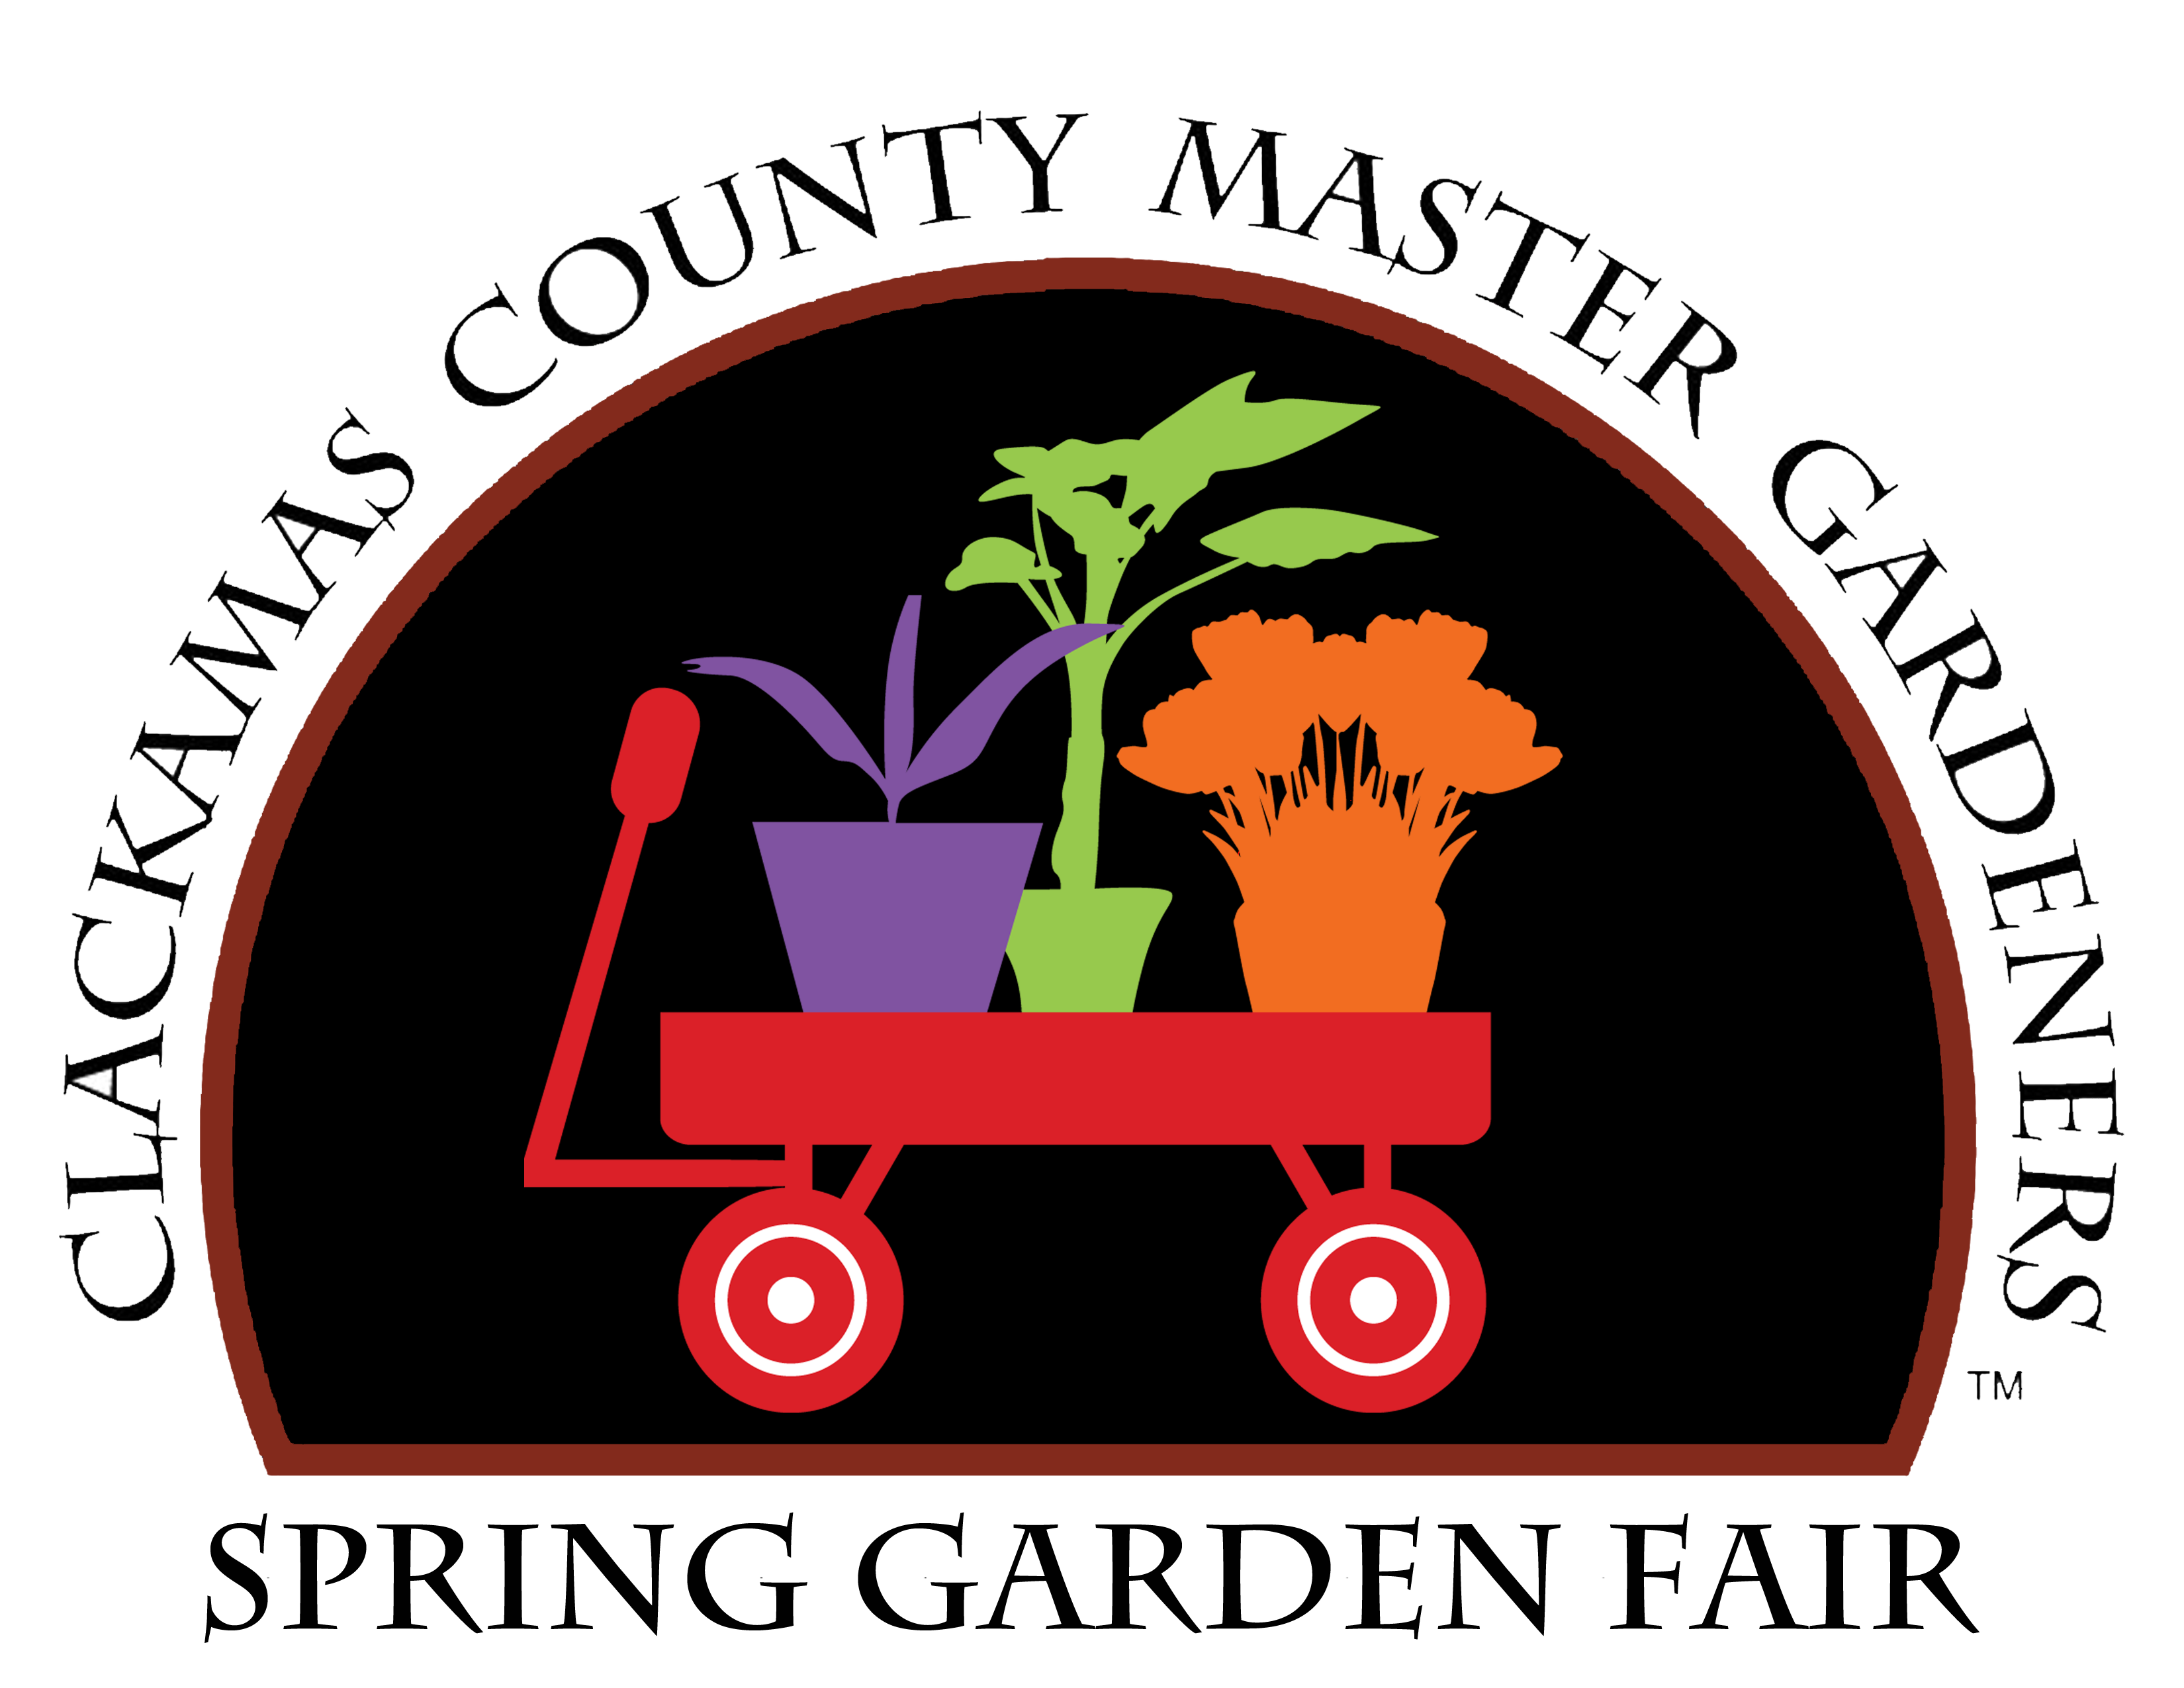 Spring Garden Fair announces 37th edition set for May 6-7 in Canby